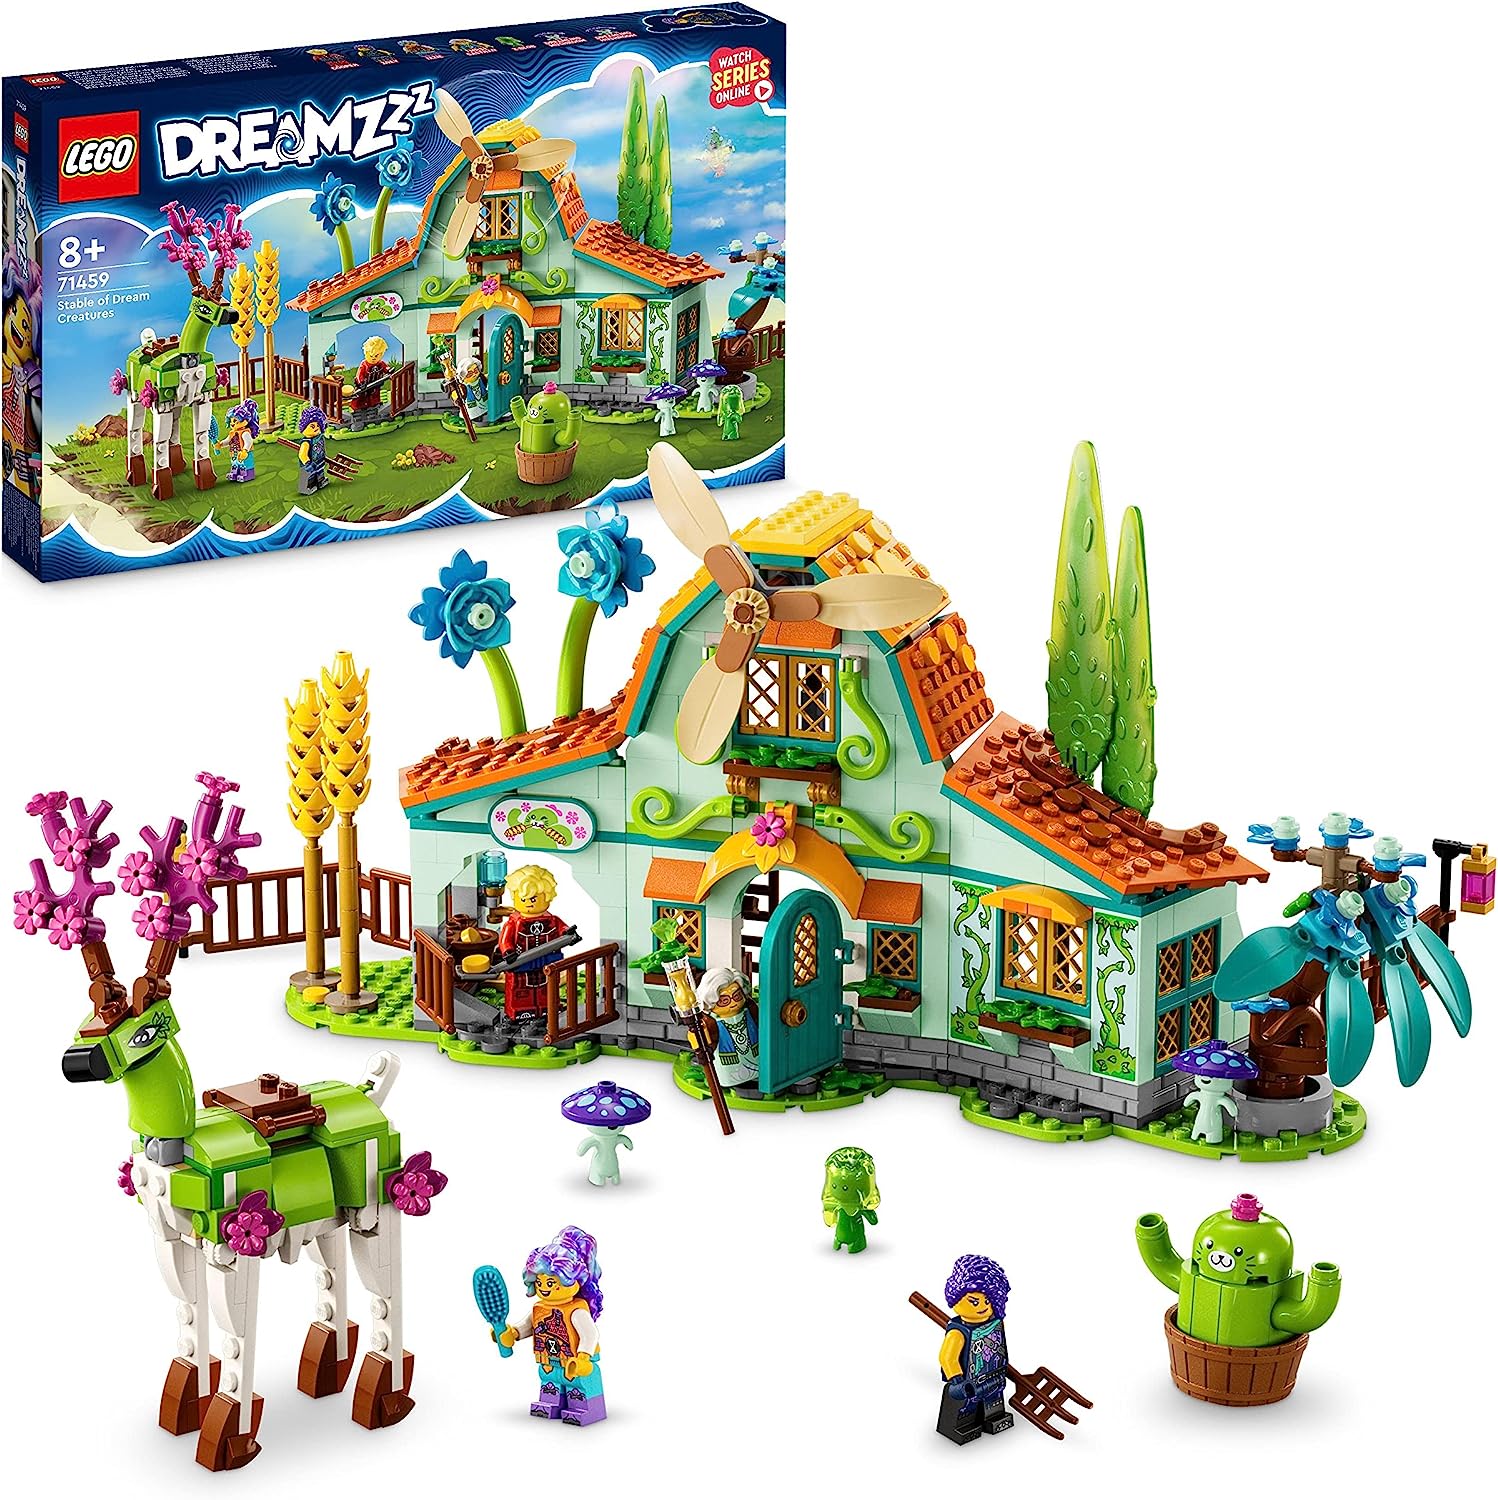 LEGO 71459 DREAMZzz Dream Creature Stall Fantasy Farm Toy with Deer Figure that Can Be Built in 2 Ways and 4 TV Show Mini Figures Set with Mythical Creatures for Kids, Girls and Boys